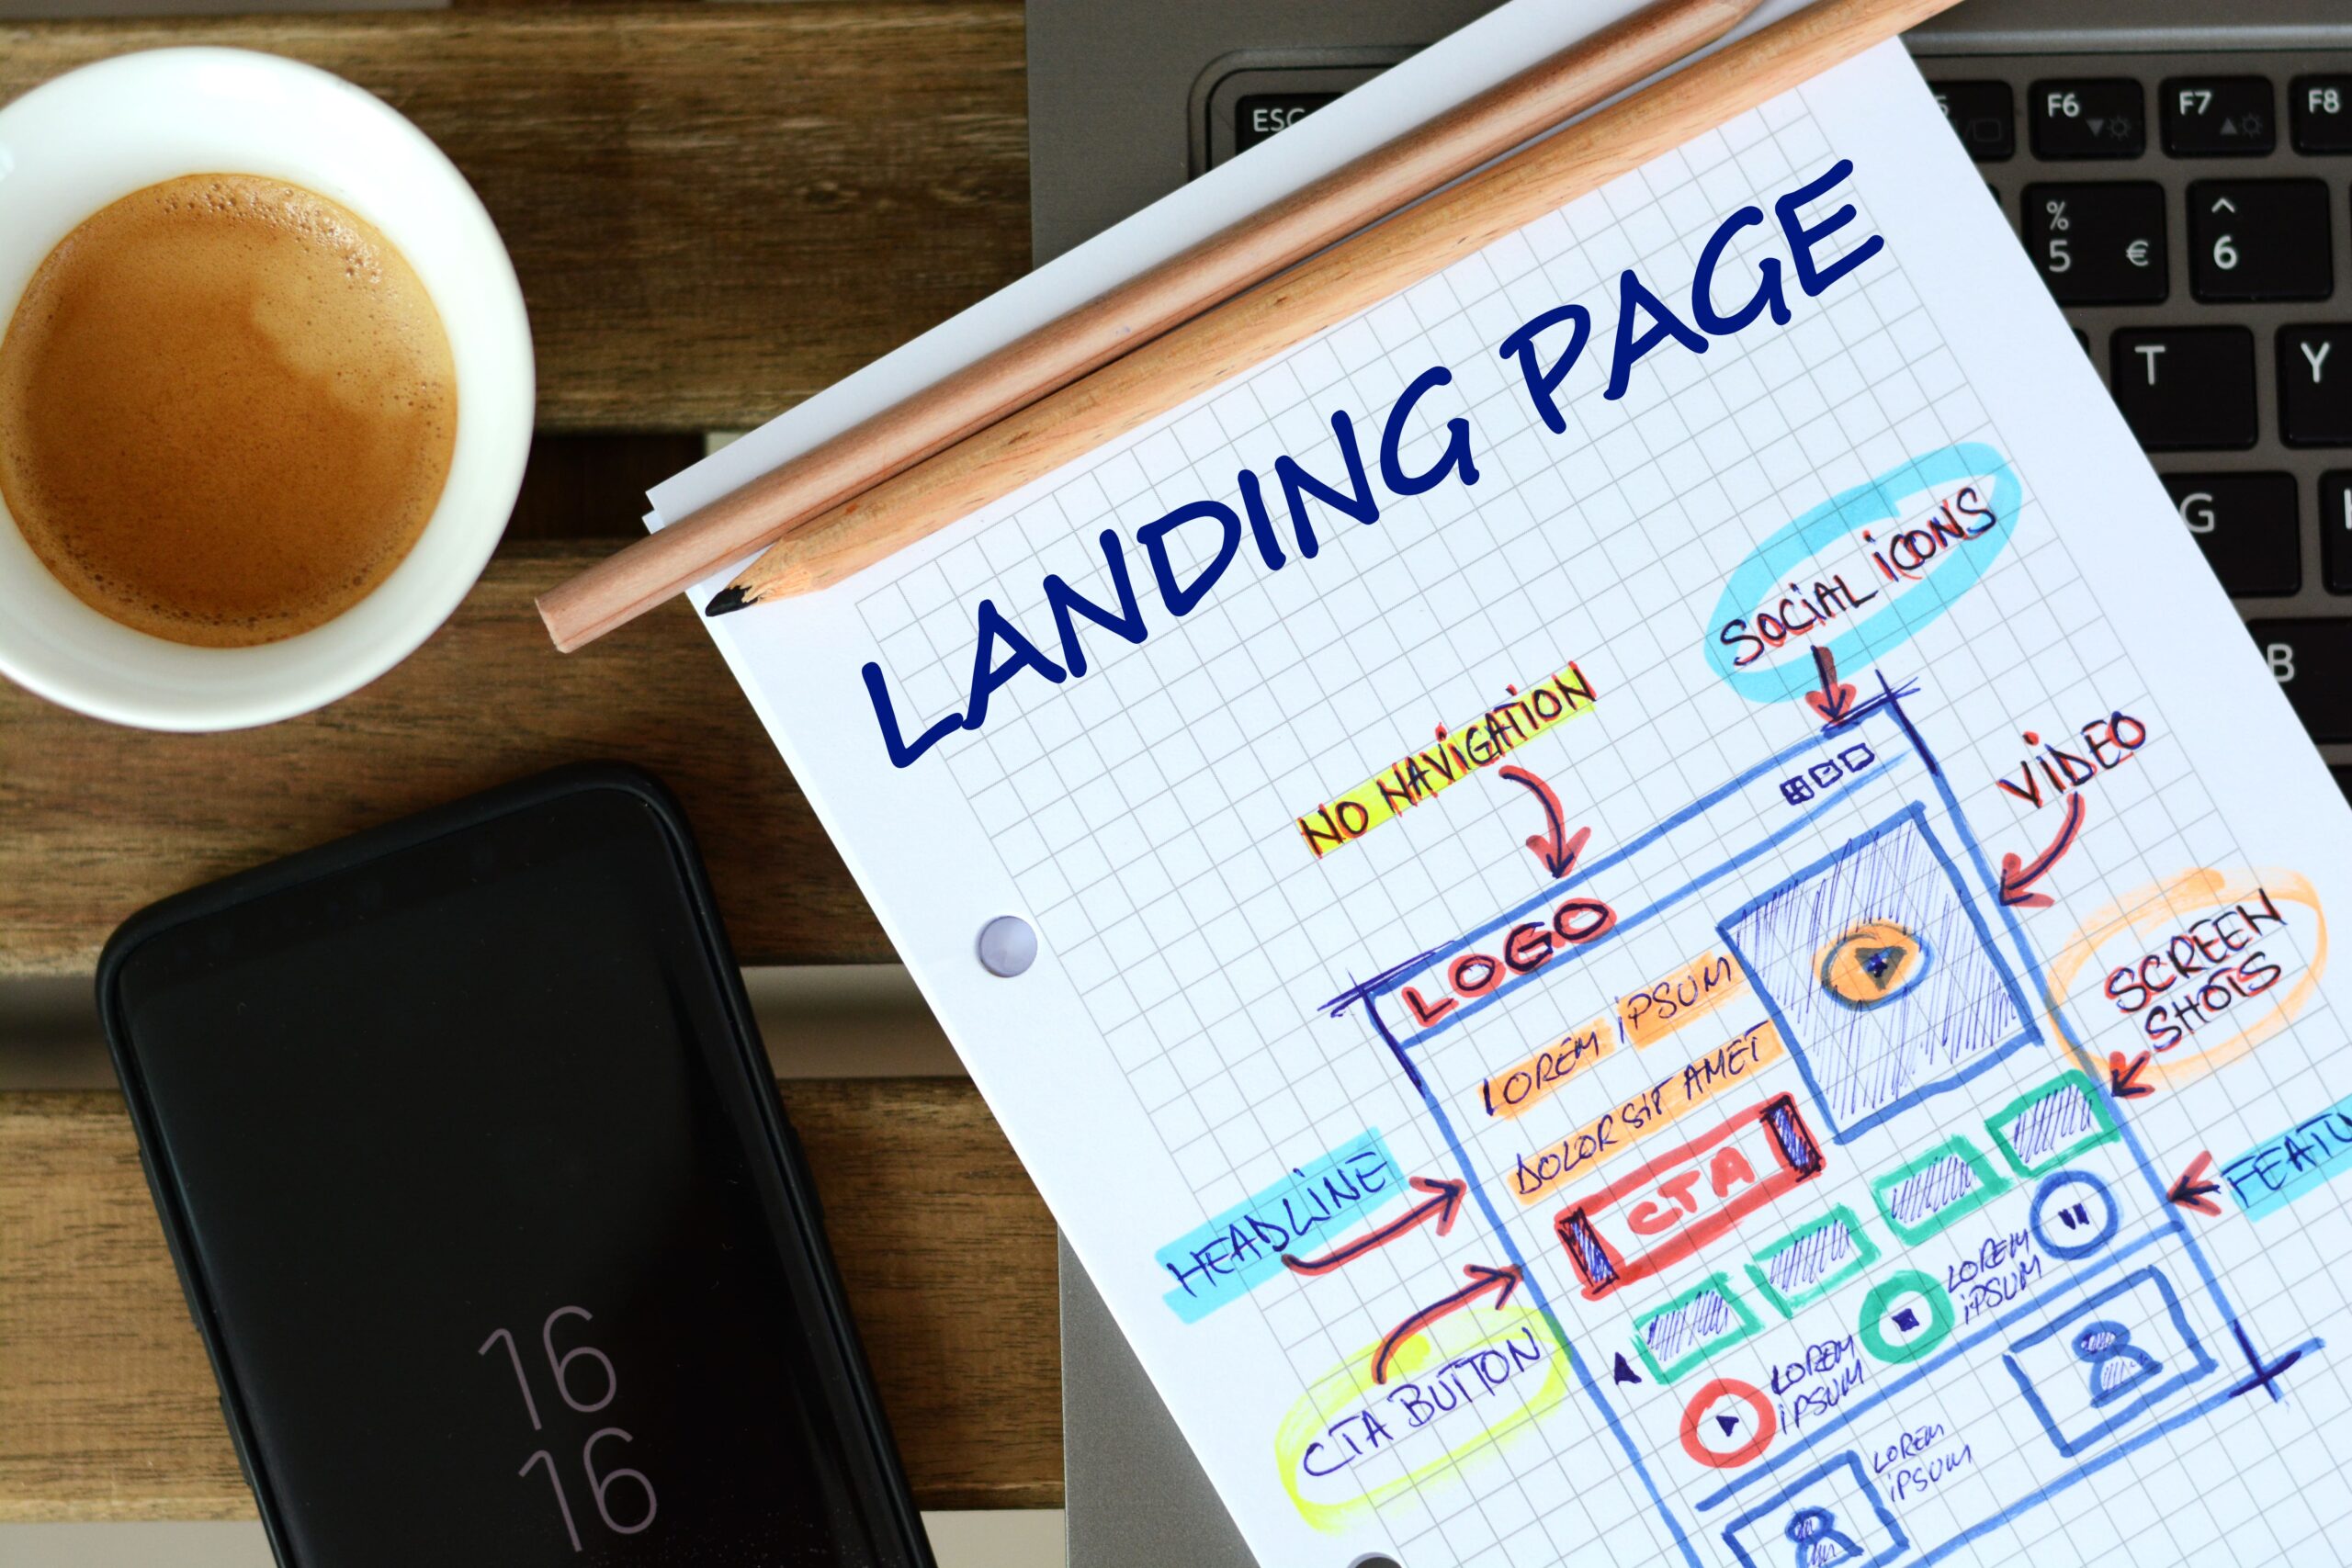 Landing Page Design layout on notebook paper